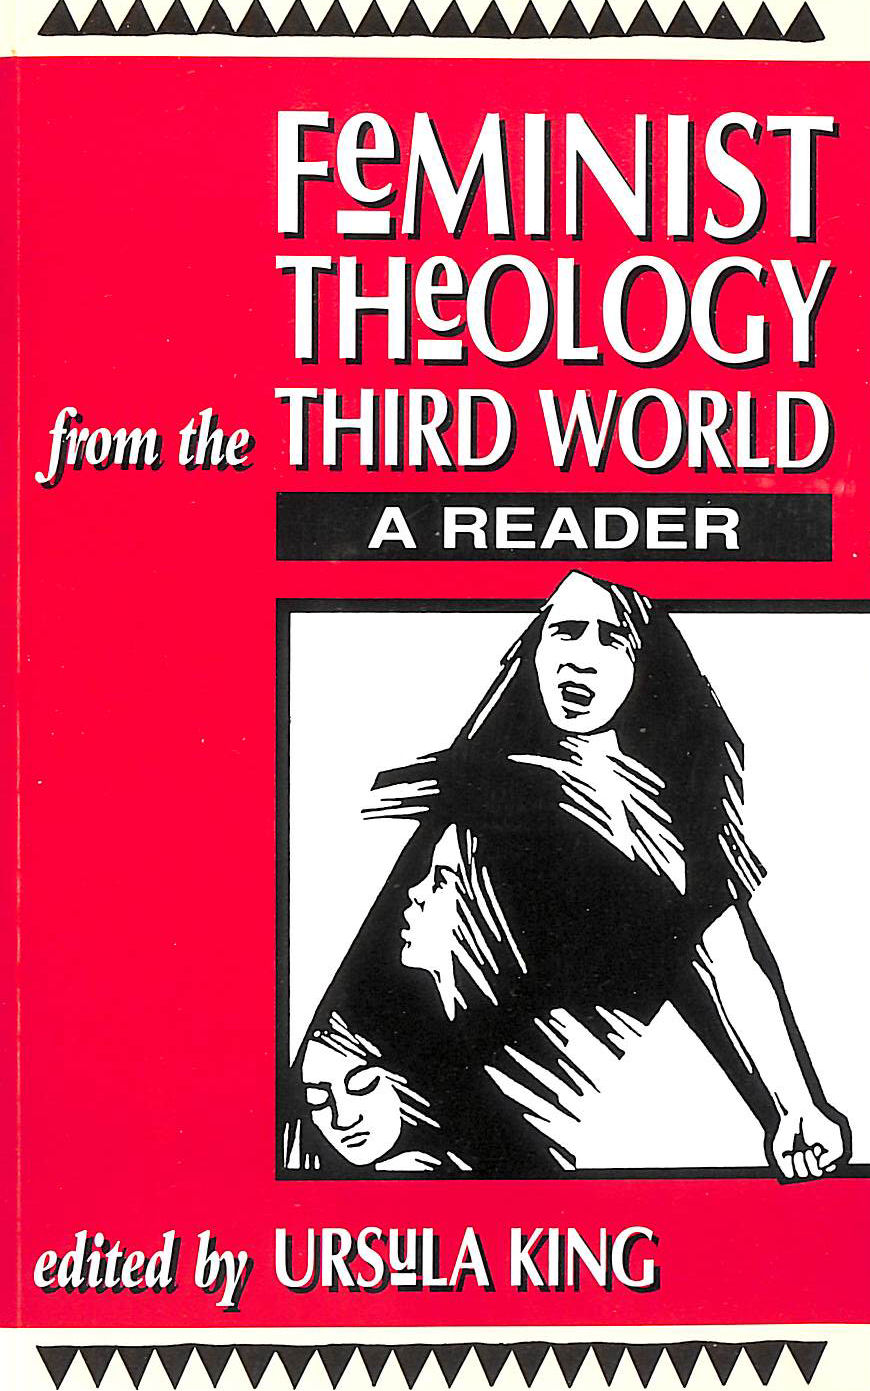 KING, URSULA [EDITOR] - Feminist Theology From The Third World: A Reader